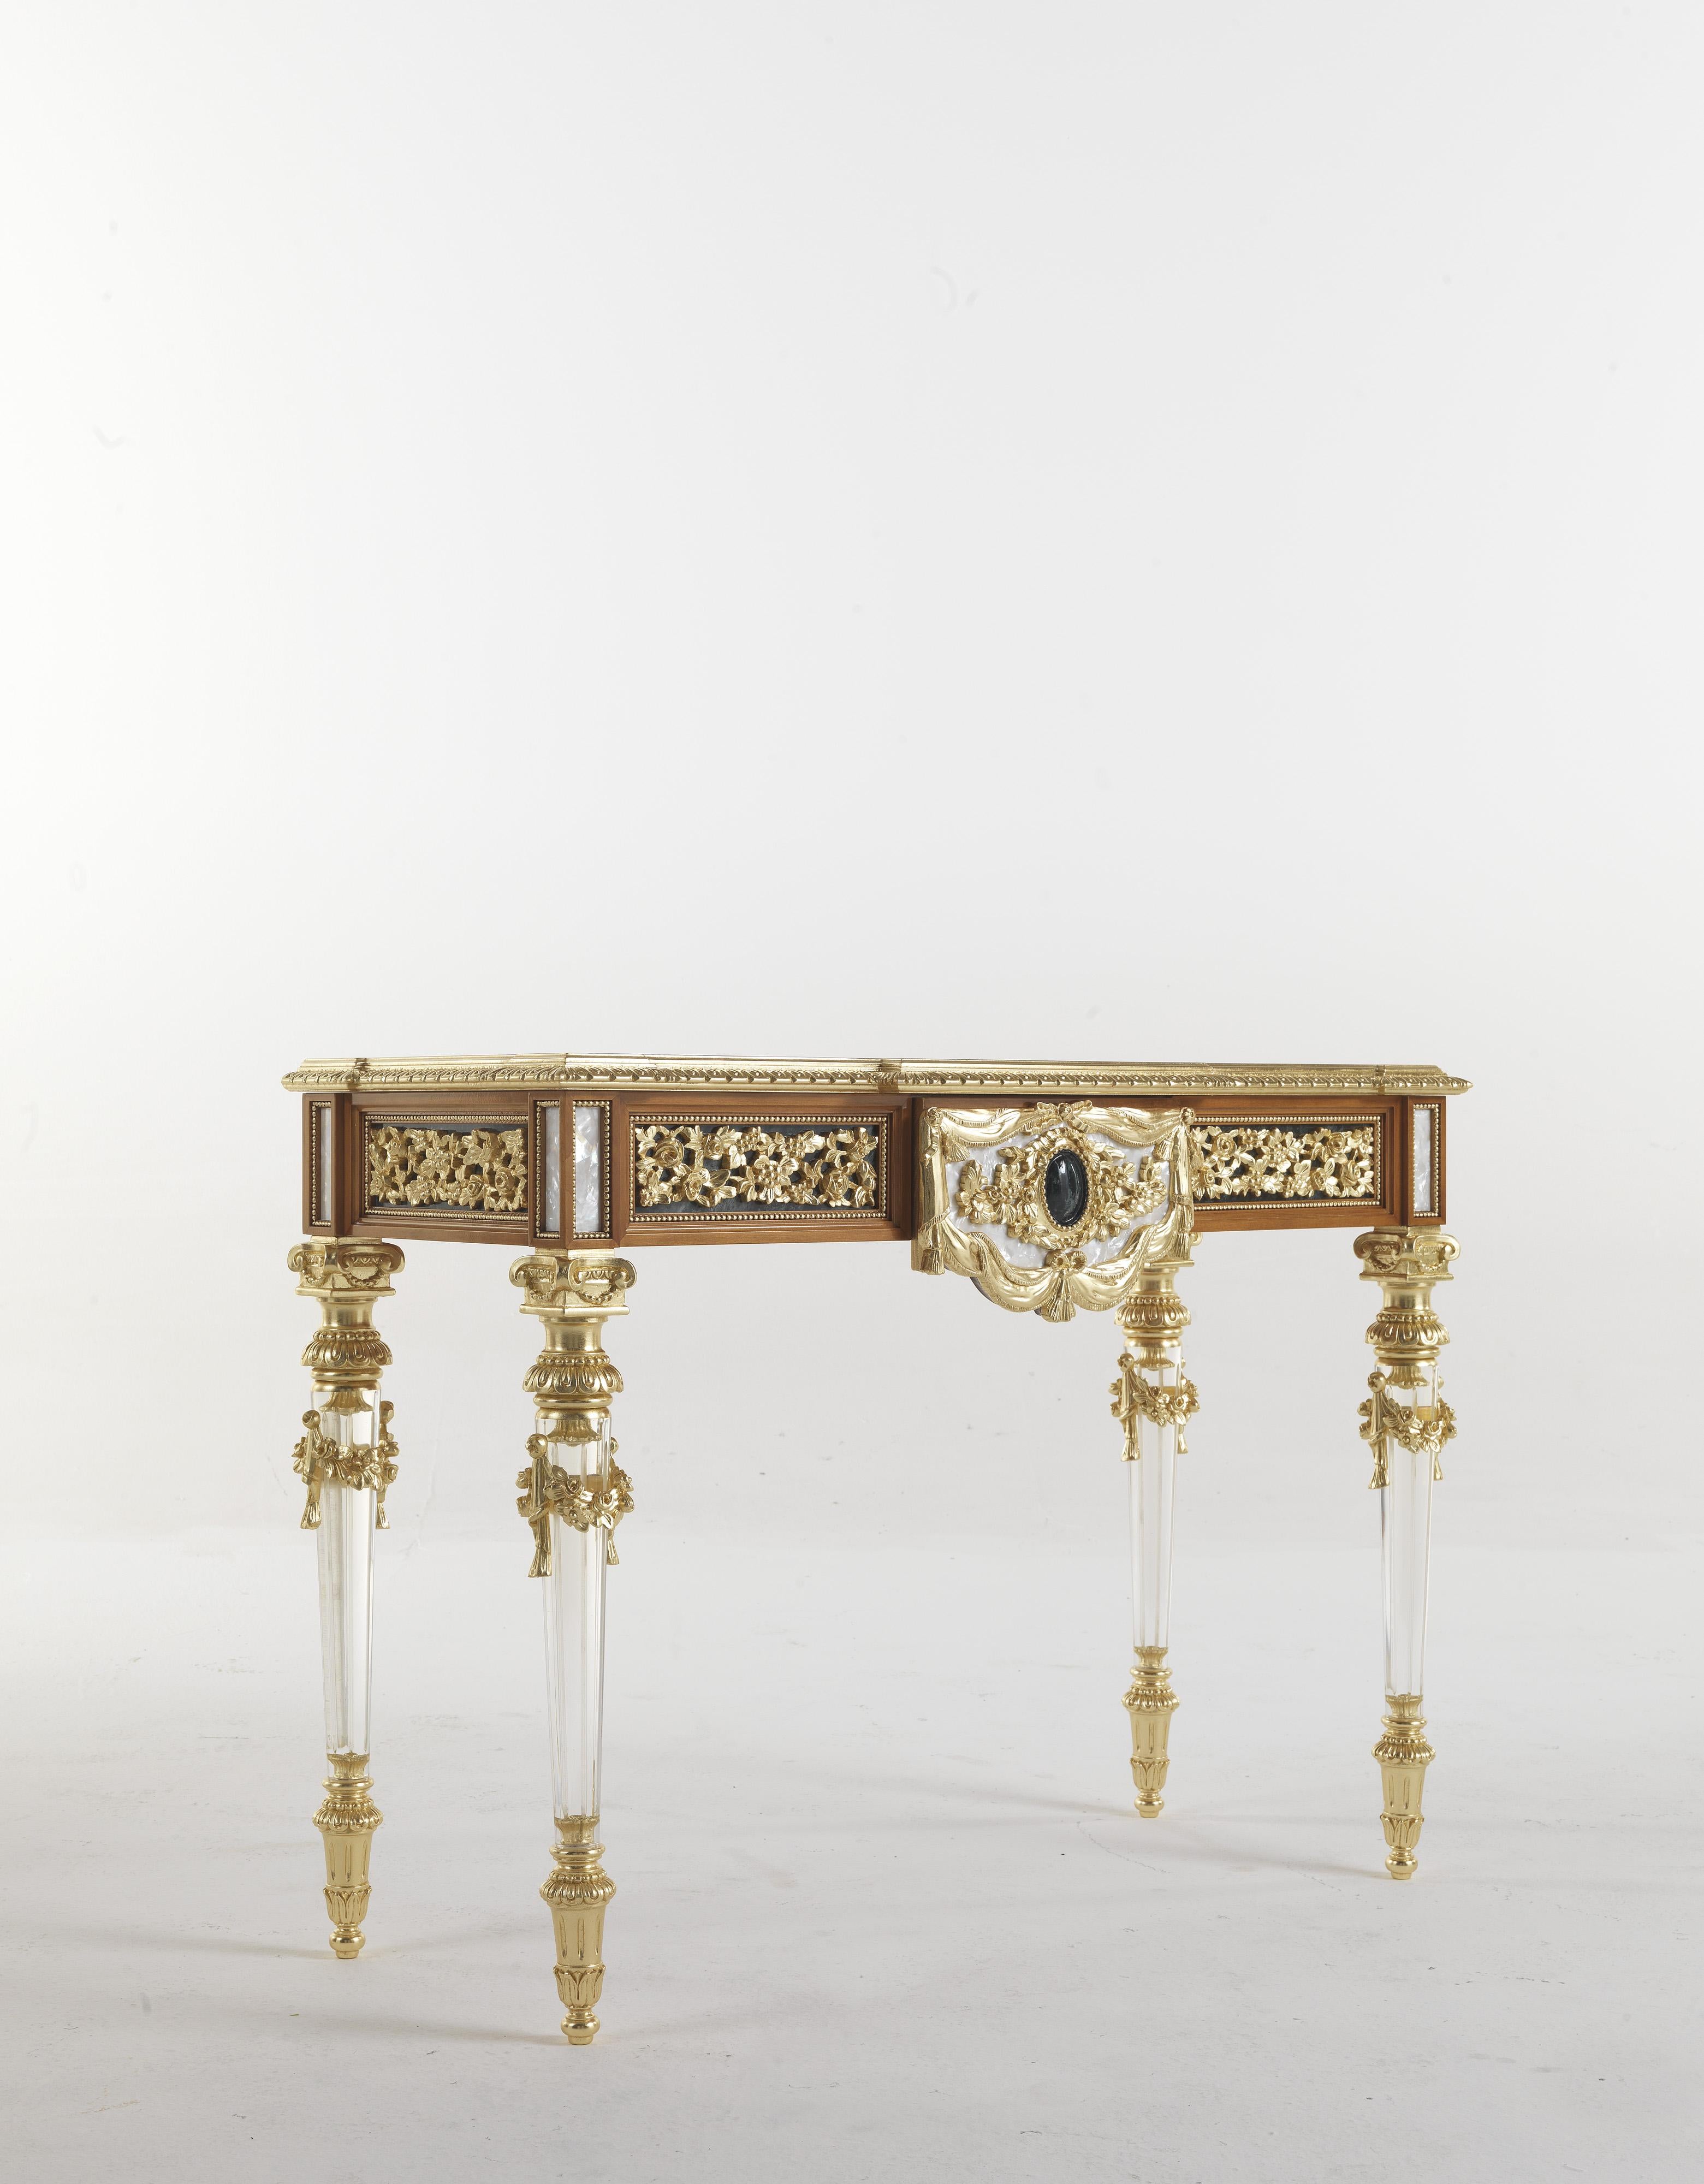 A splendid console in Louis XVI style, of fine Italian cabinetry. The structure with light walnut finish is characterized by hand-carved details finished in gold leaf and mother-of-pearl decorations, the legs are also hand-carved while the top has